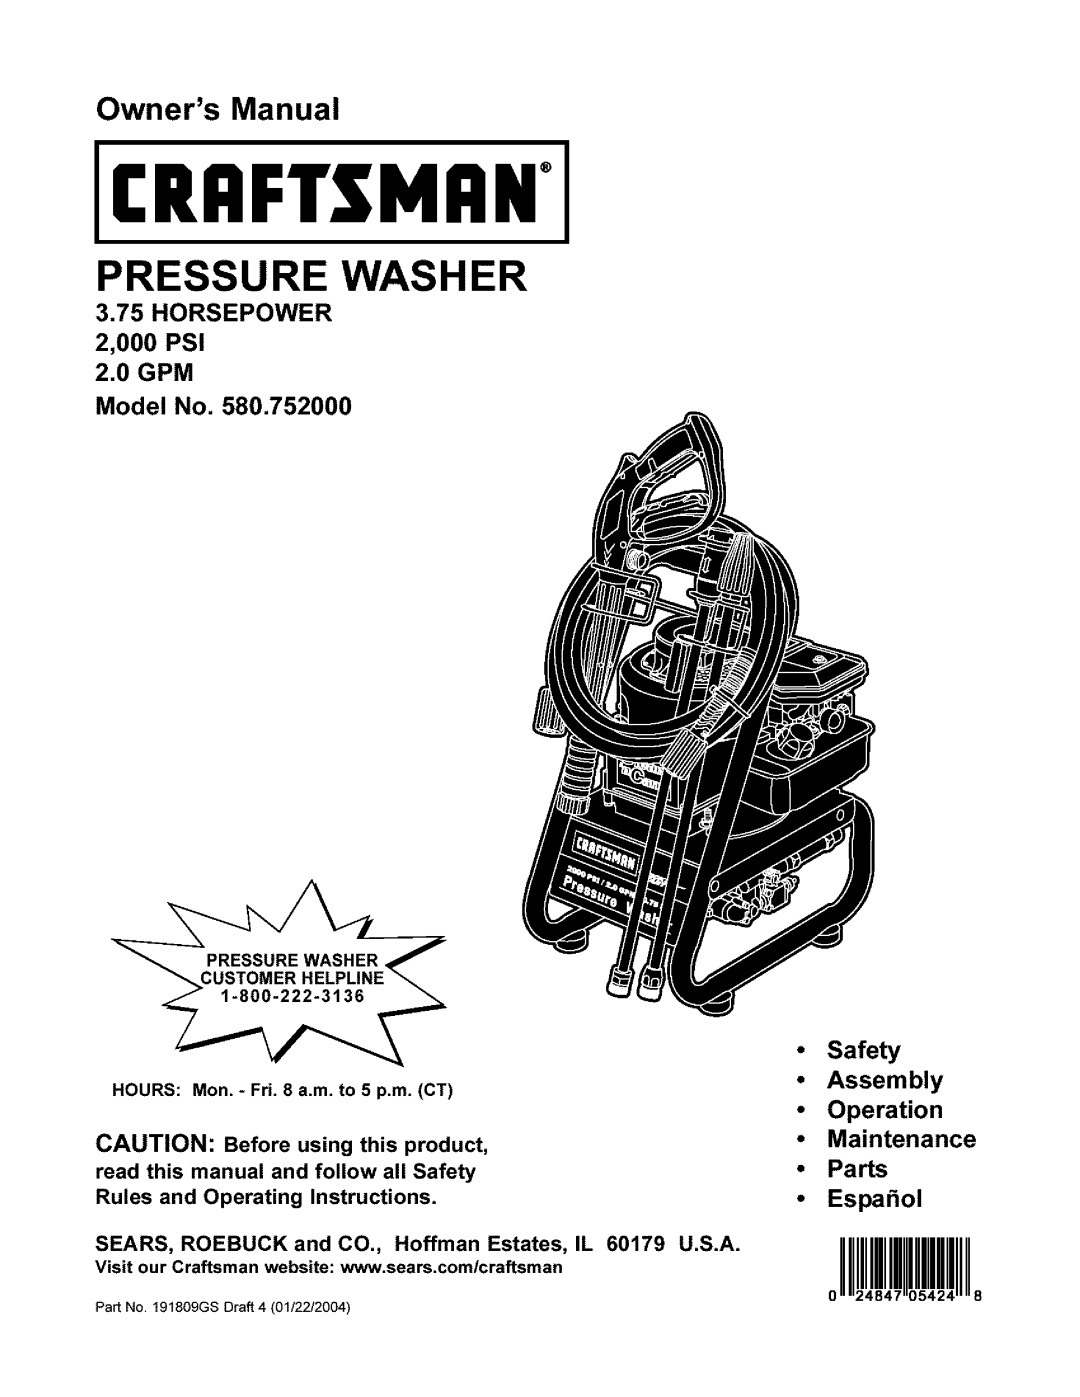 Craftsman 580.752 owner manual Pressure Washer, HORSEPOWER 2,000 PSI 2.0 GPM Model No, Safety Assembly, Operation, Parts 